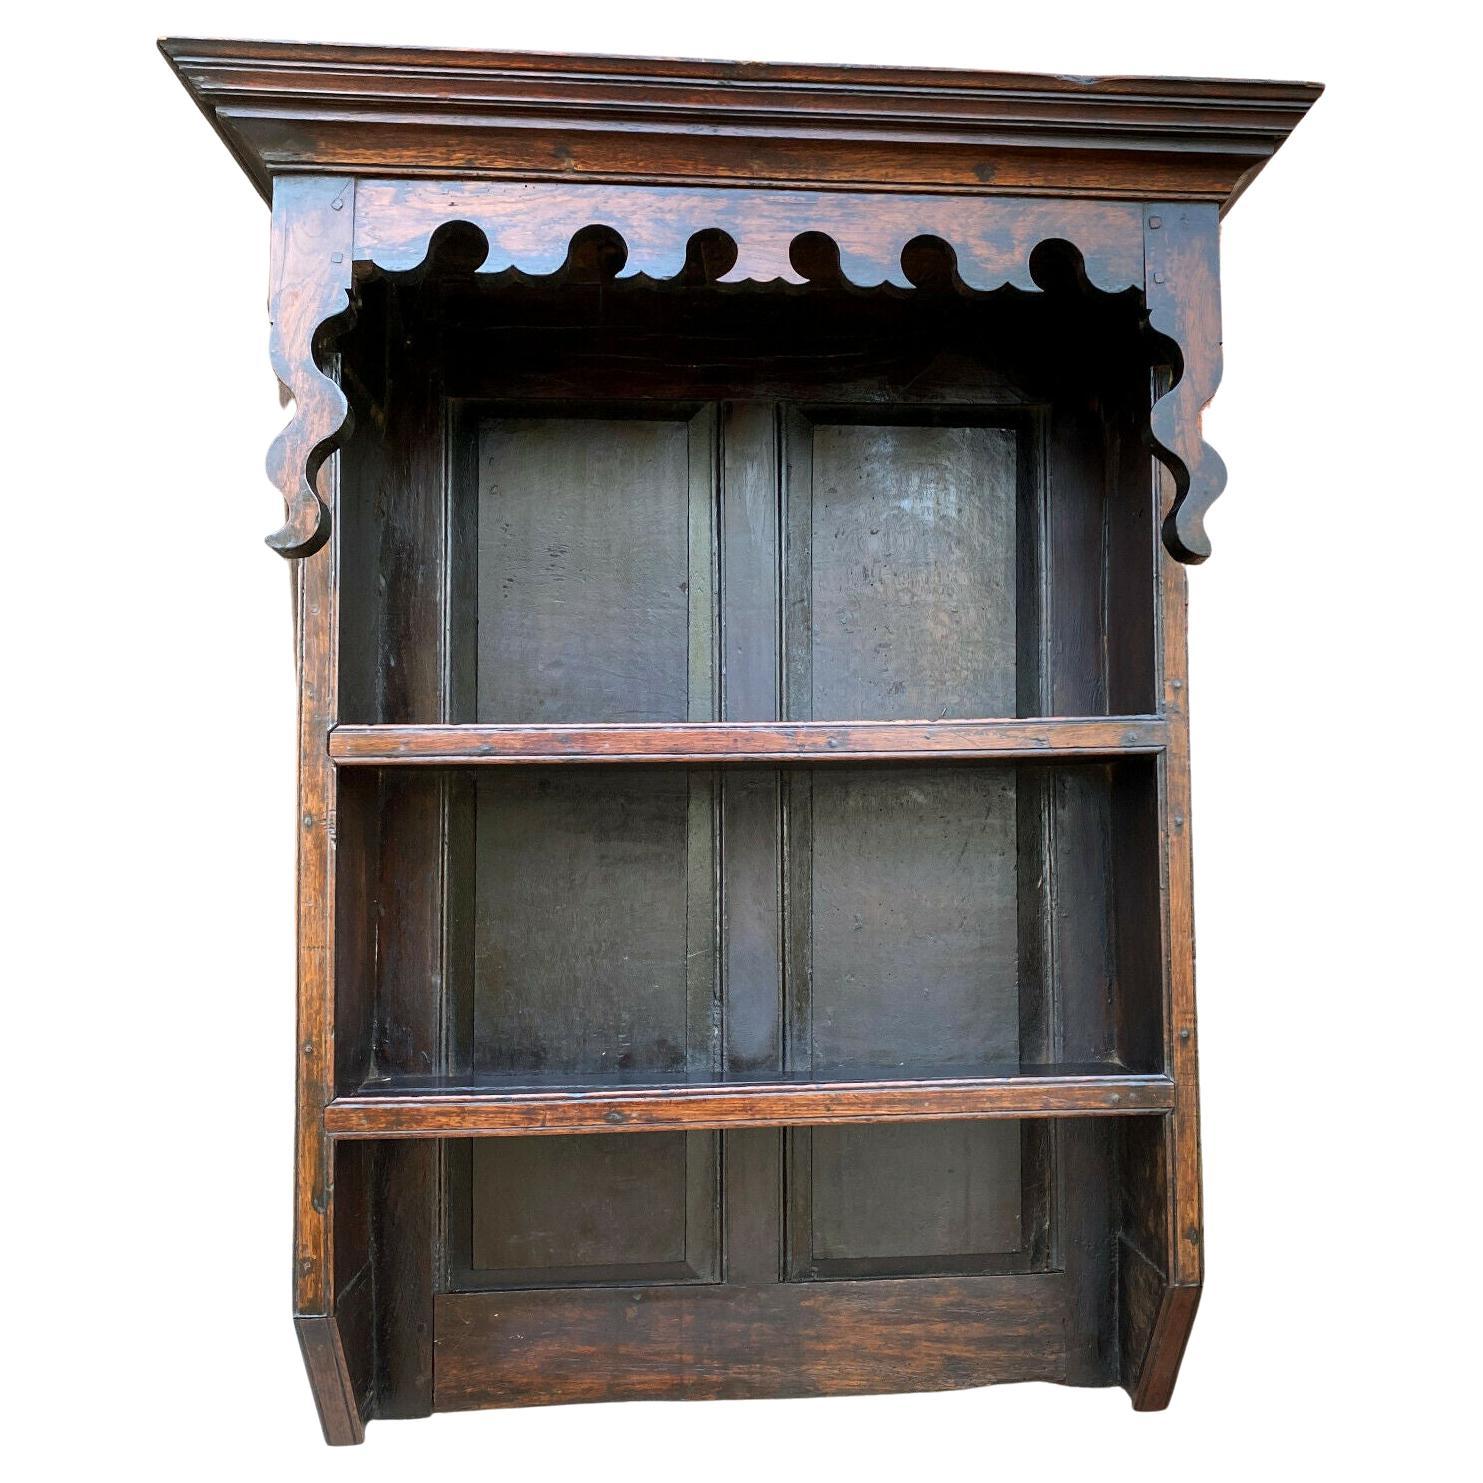 Antique English Plate Rack Wall Shelf Bookcase Hanging Carved Oak Pegged c. 1900